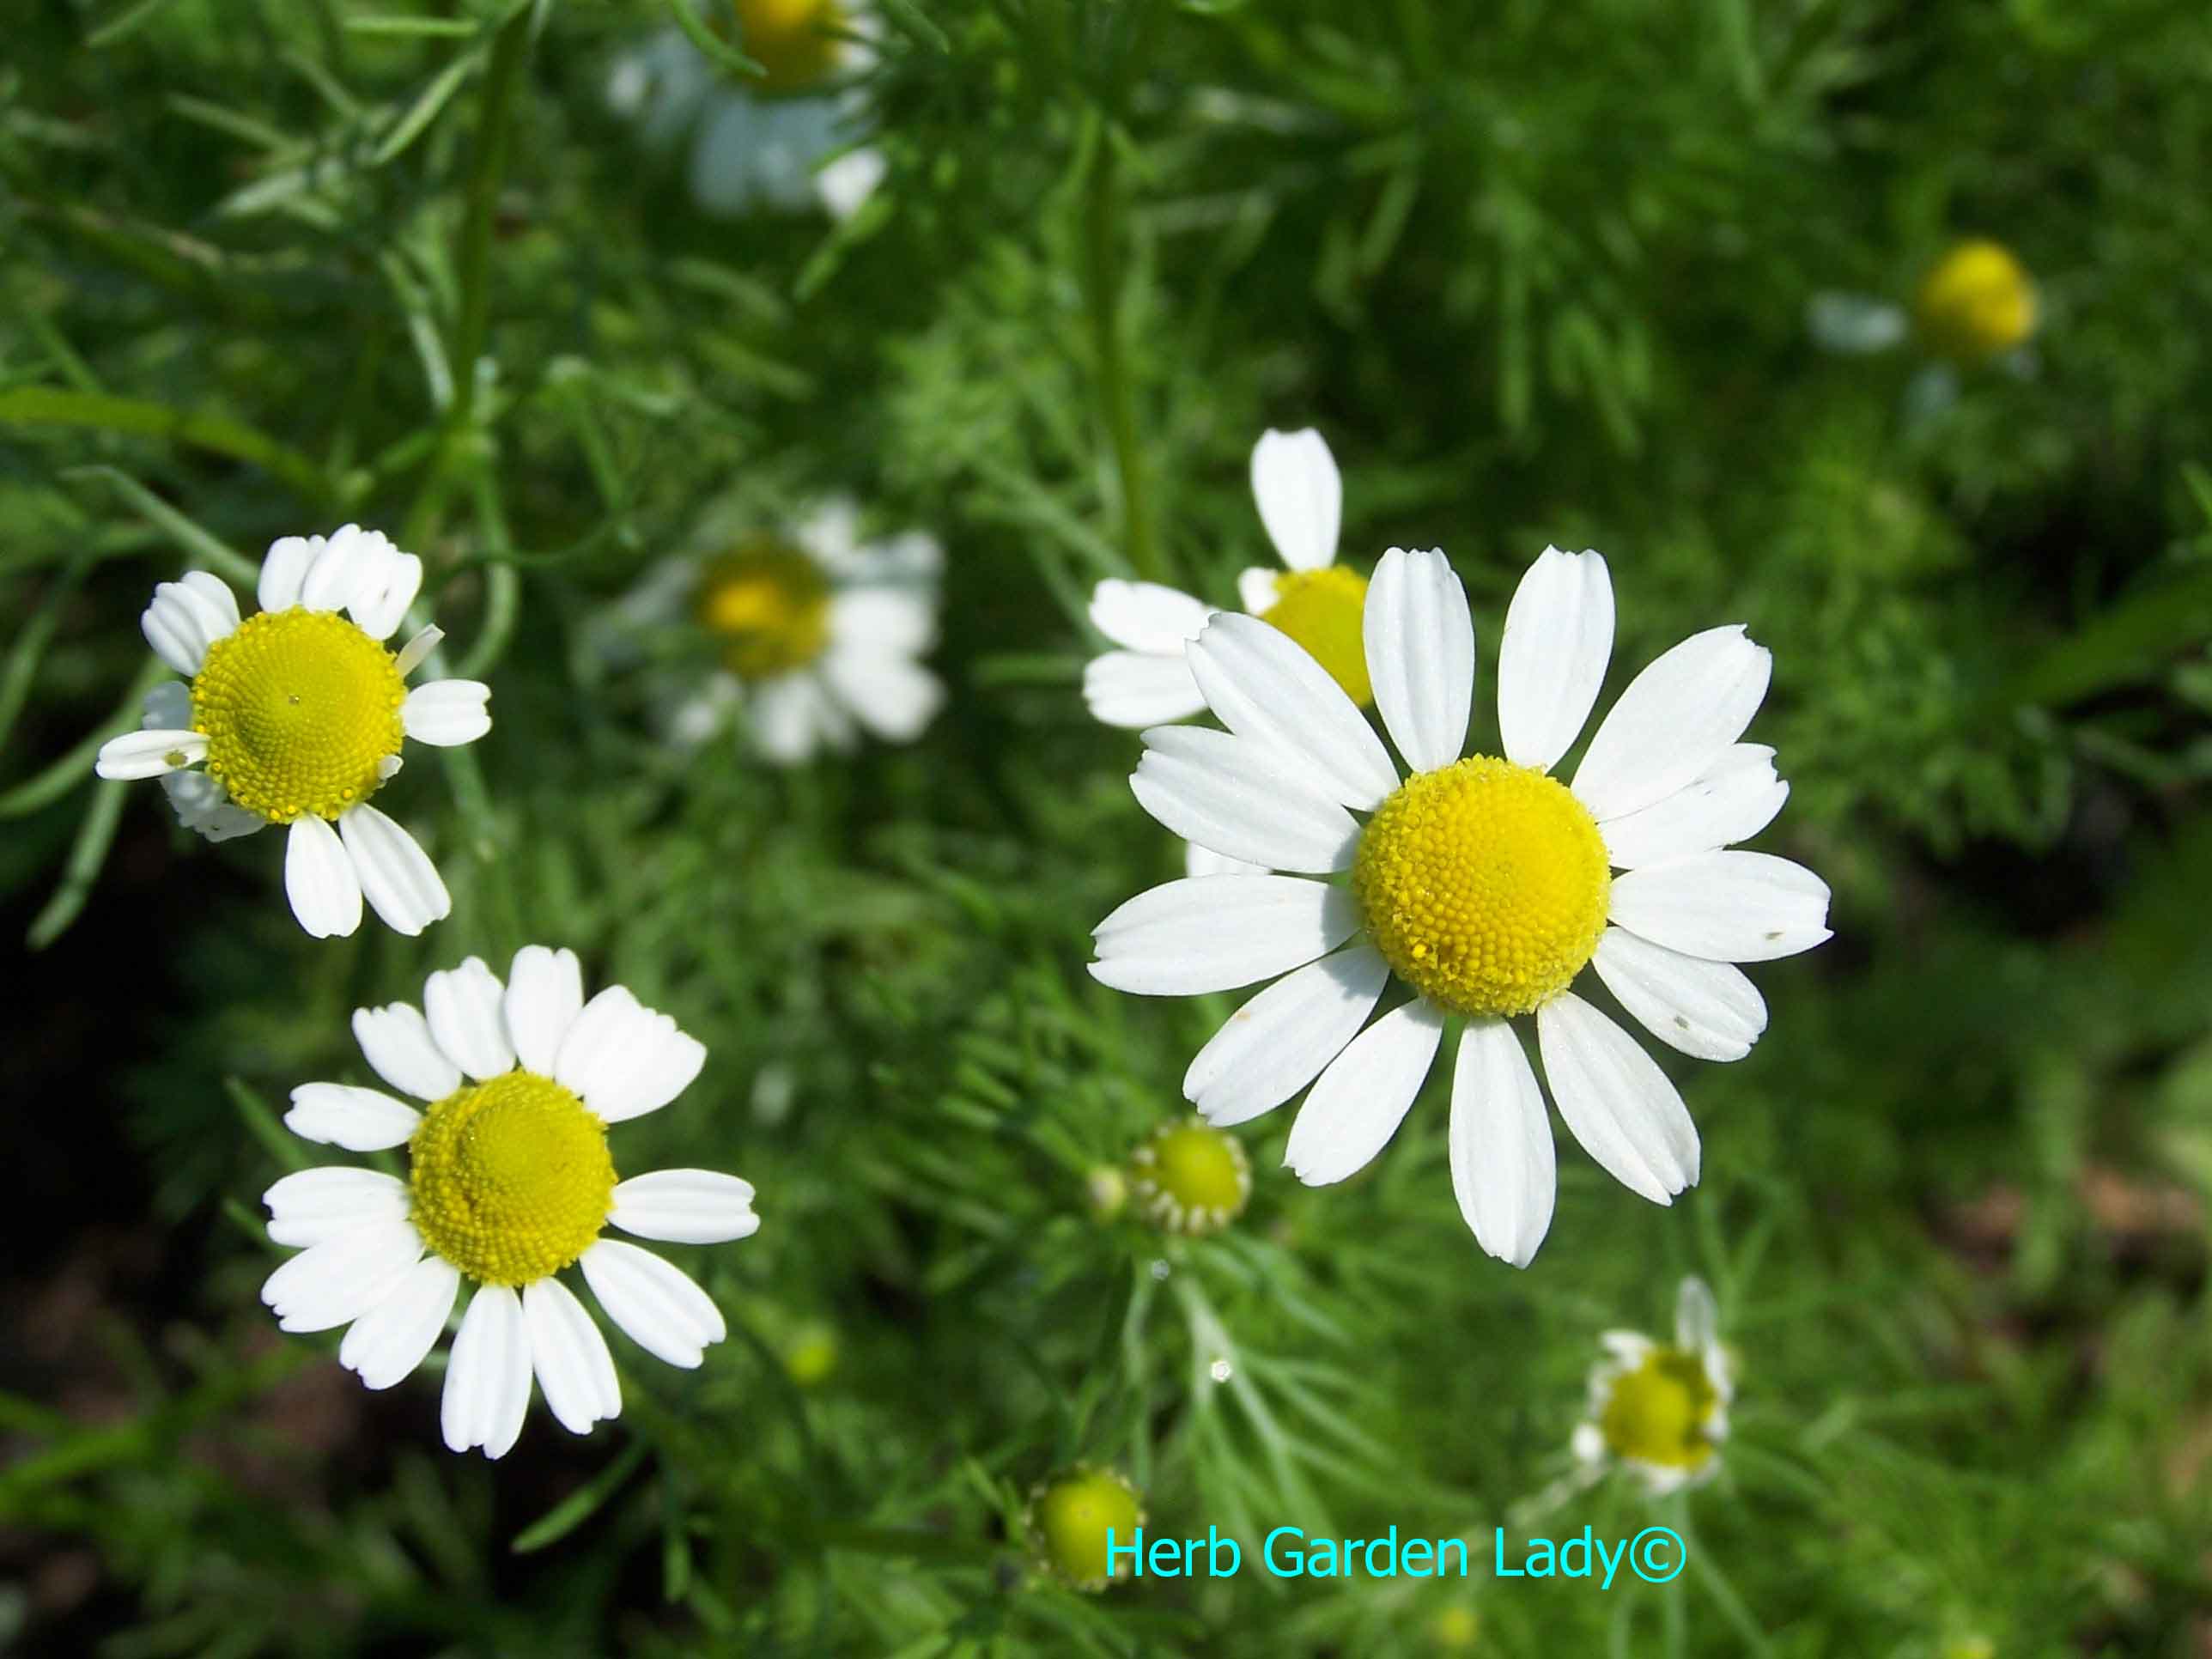 Chamomile herb used in aromatherapy is excellent for depression, diarrhea, digestion, menstrual and your skin.